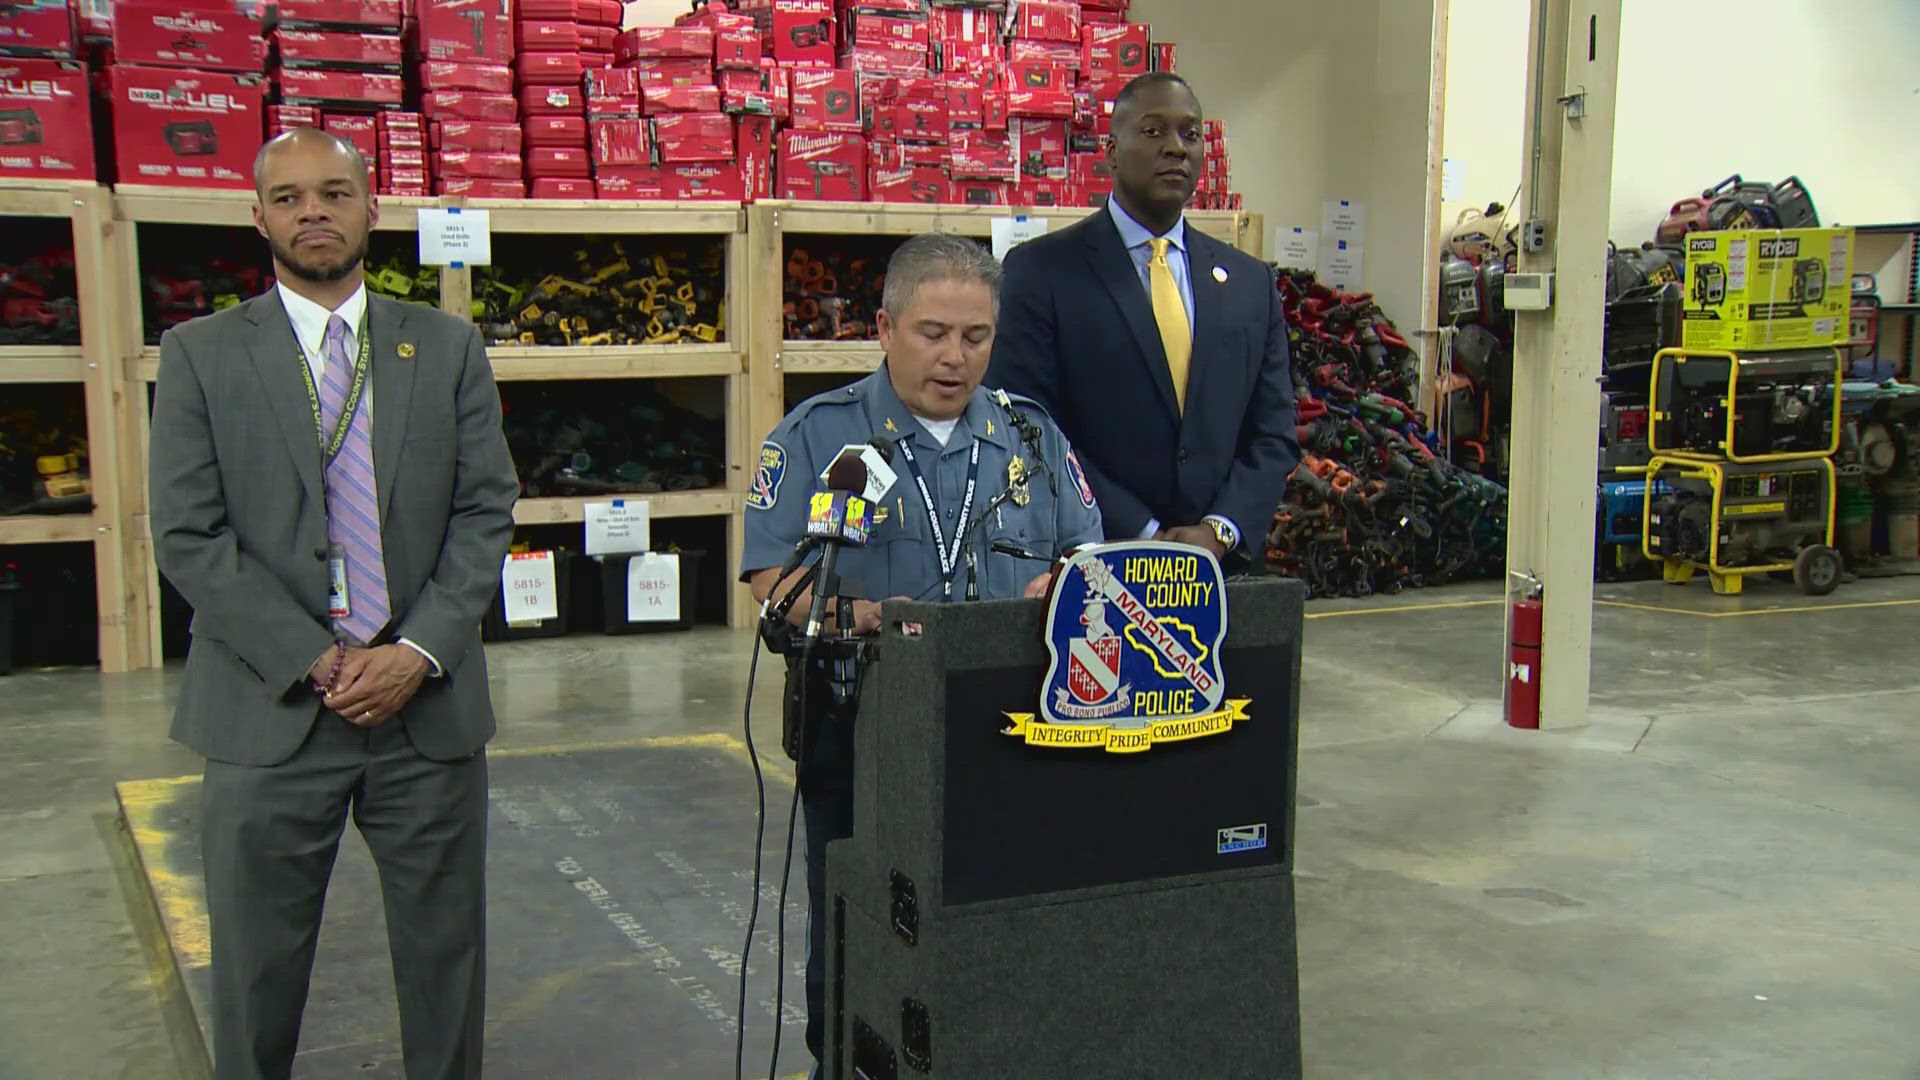 Around 15,000 stolen construction tools with an estimated value of $3 million to $5 million were recovered by Howard County Police.